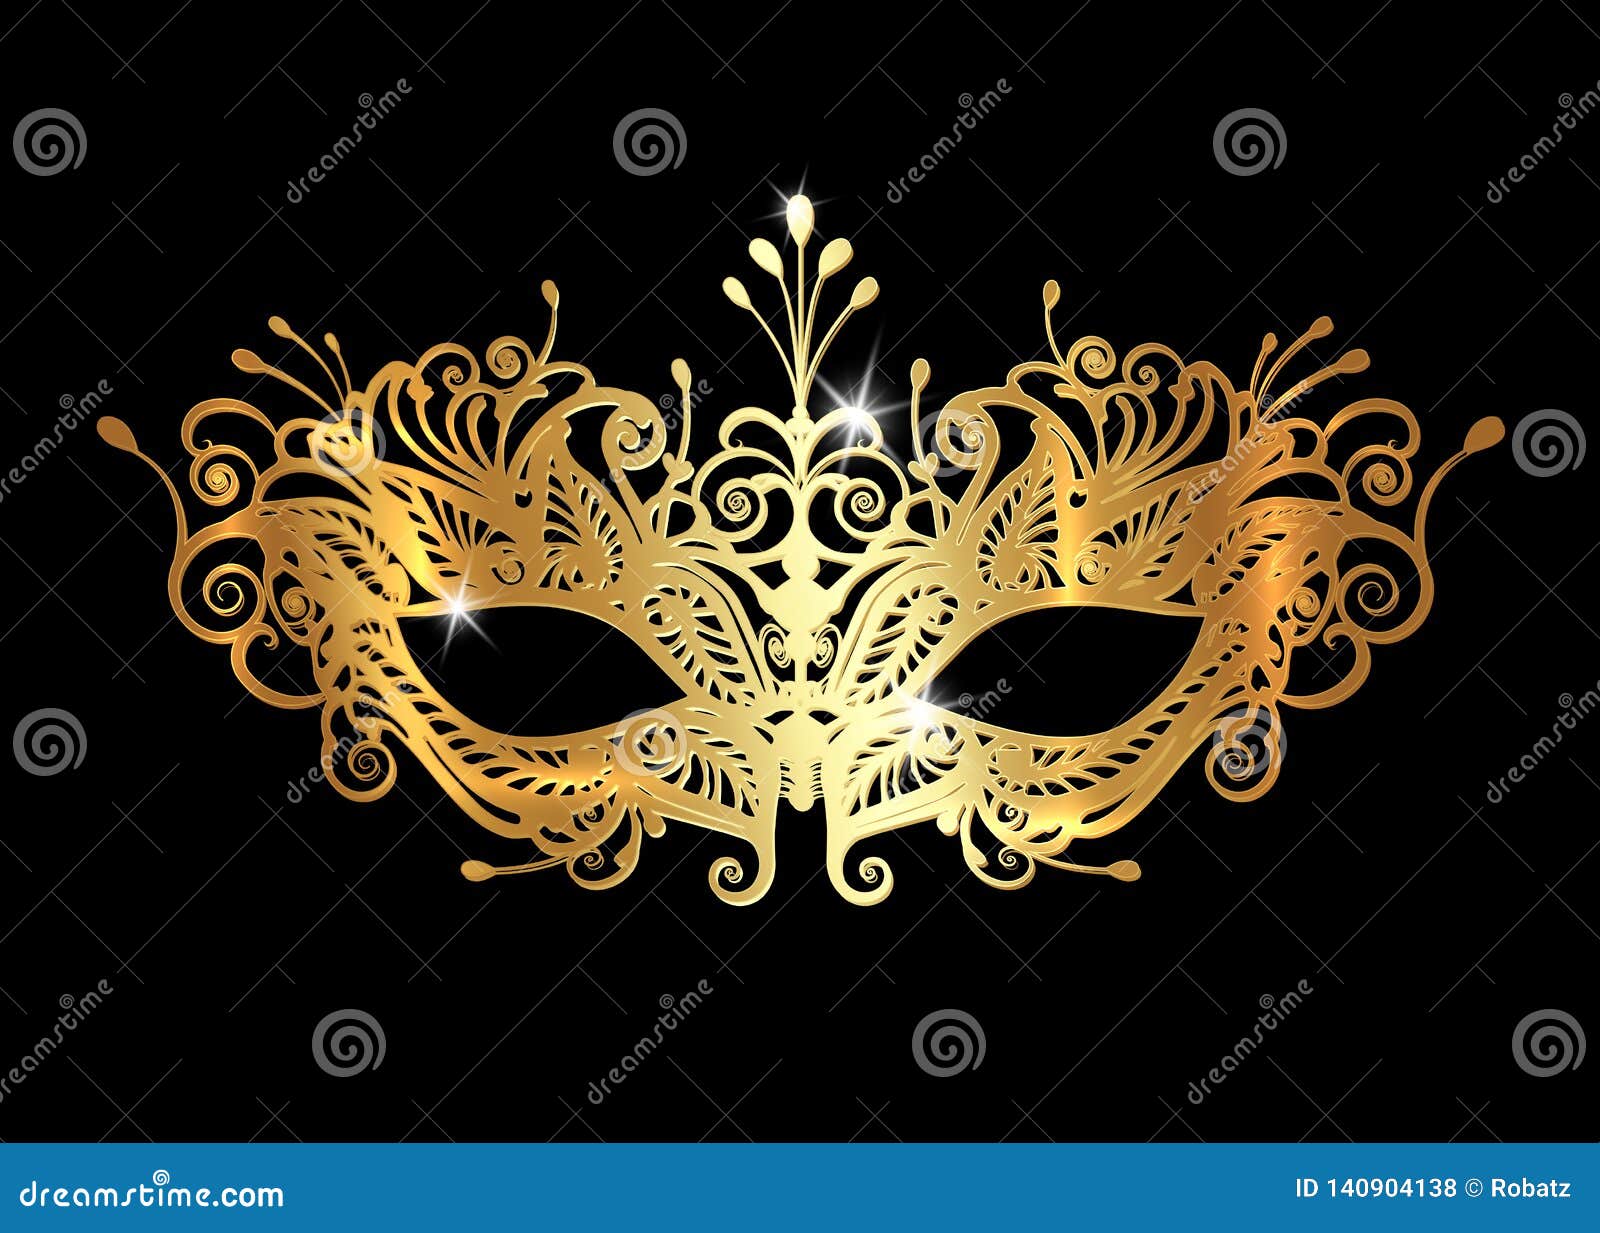 golden venetian mask realistic with laser cut gold embroidery. stylish masquerade party. mardi gras card invitation. night party